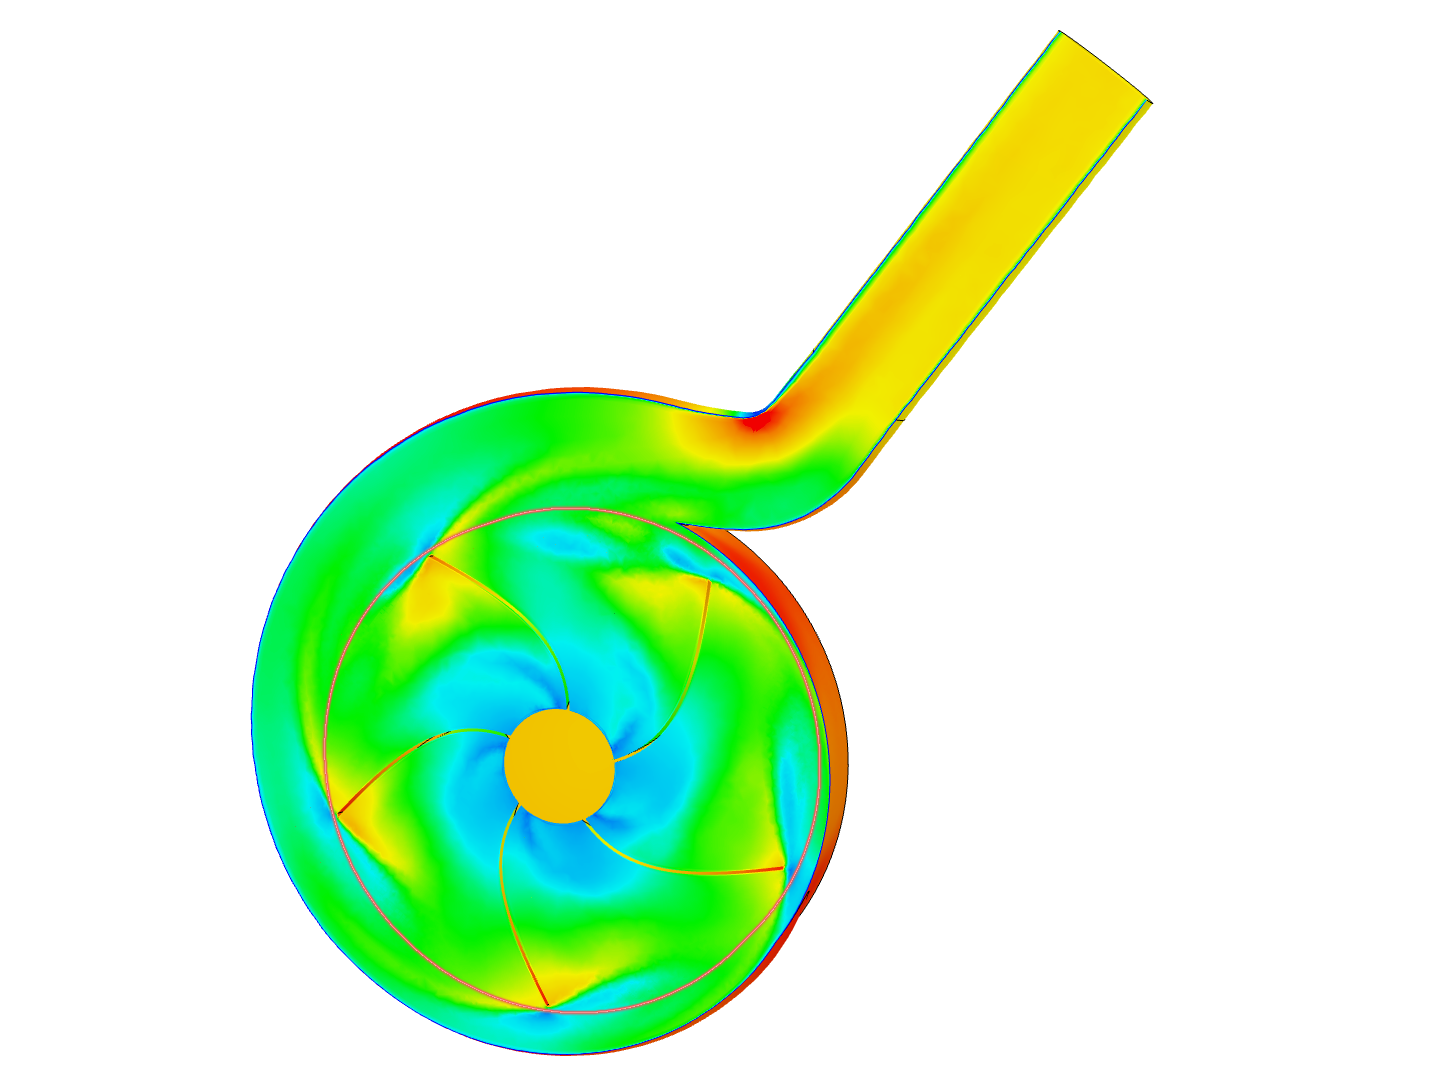 CFD analysis on a Centrifugal Pump image